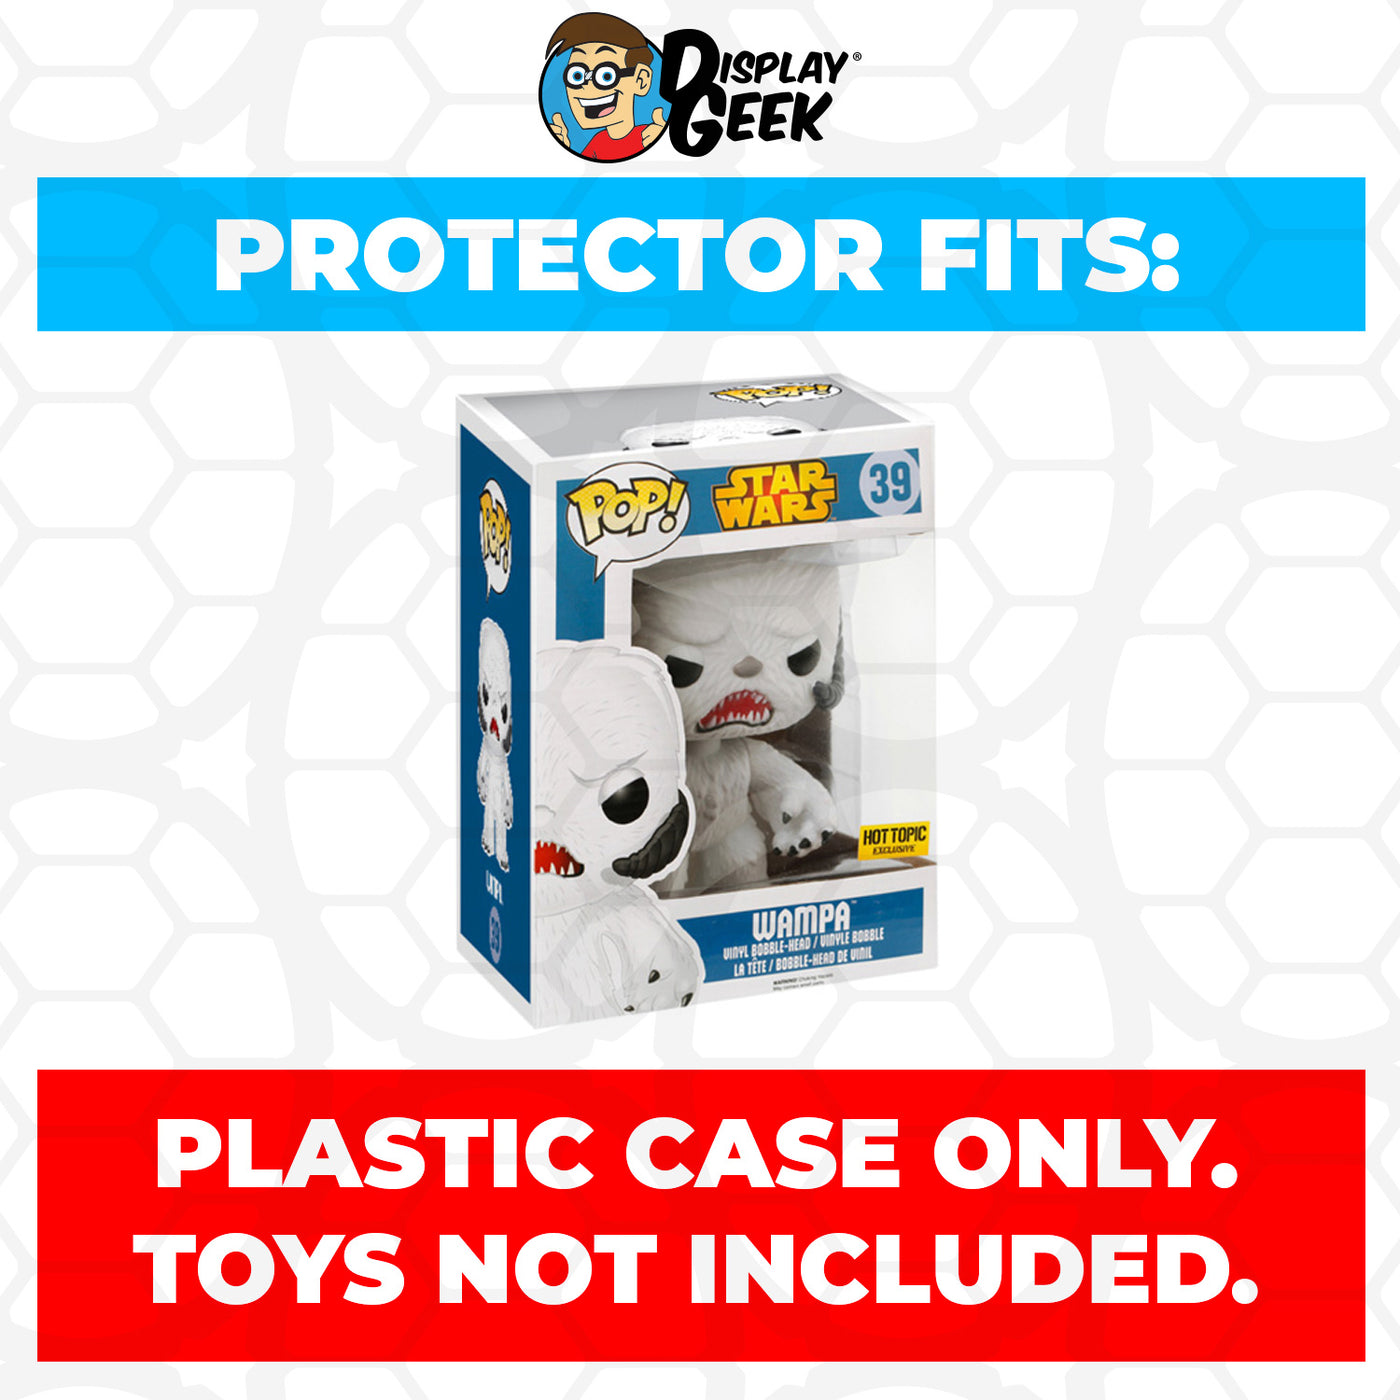 Pop Protector for 6 inch Wampa Flocked #39 Super Funko Pop on The Protector Guide App by Display Geek